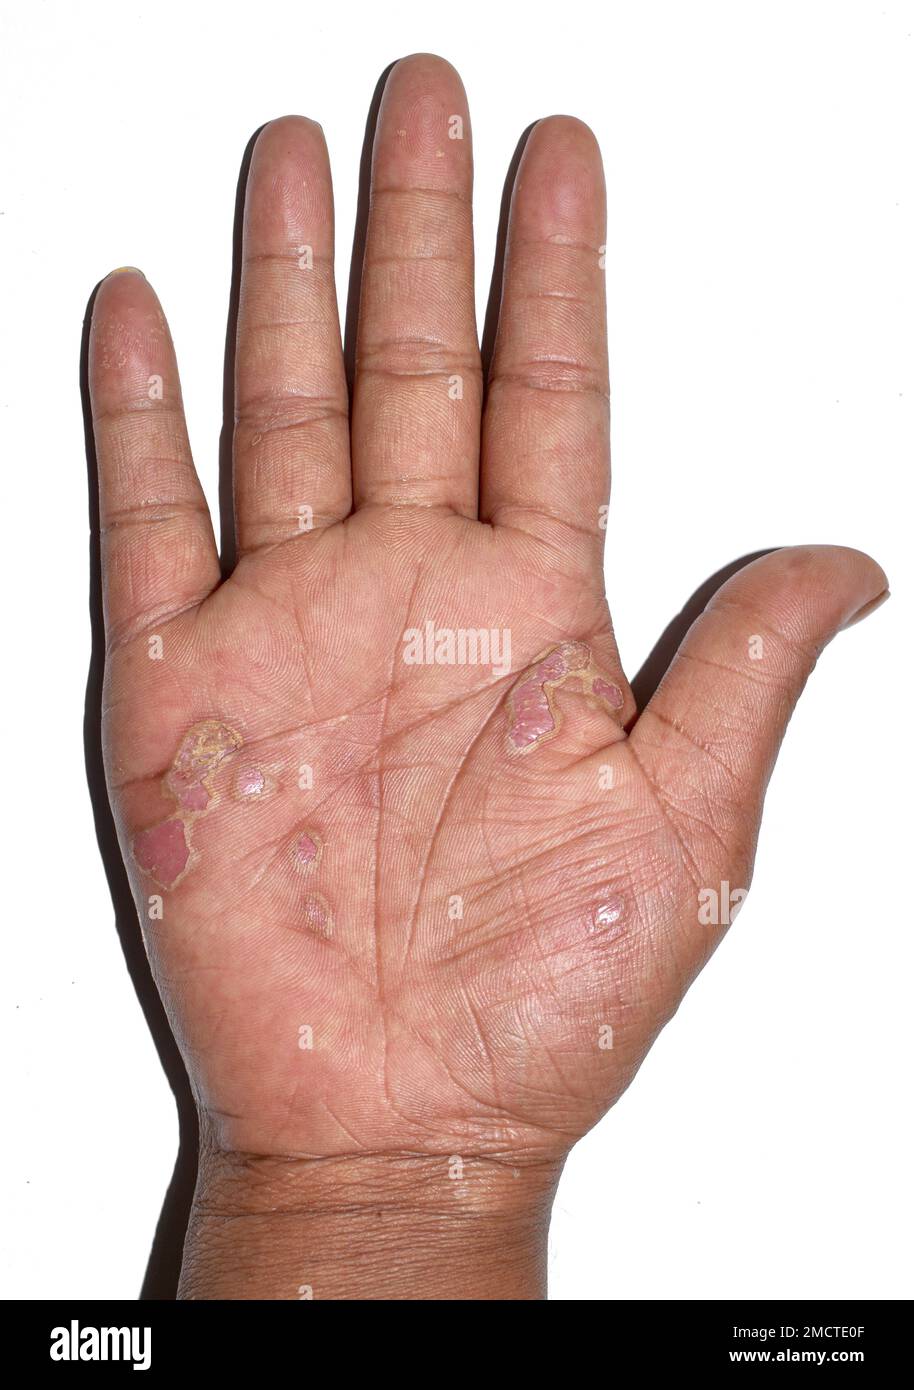 Desquamation or peeling skin of hand due to dermatitis. Itchy palm. Isolated on white. Stock Photo